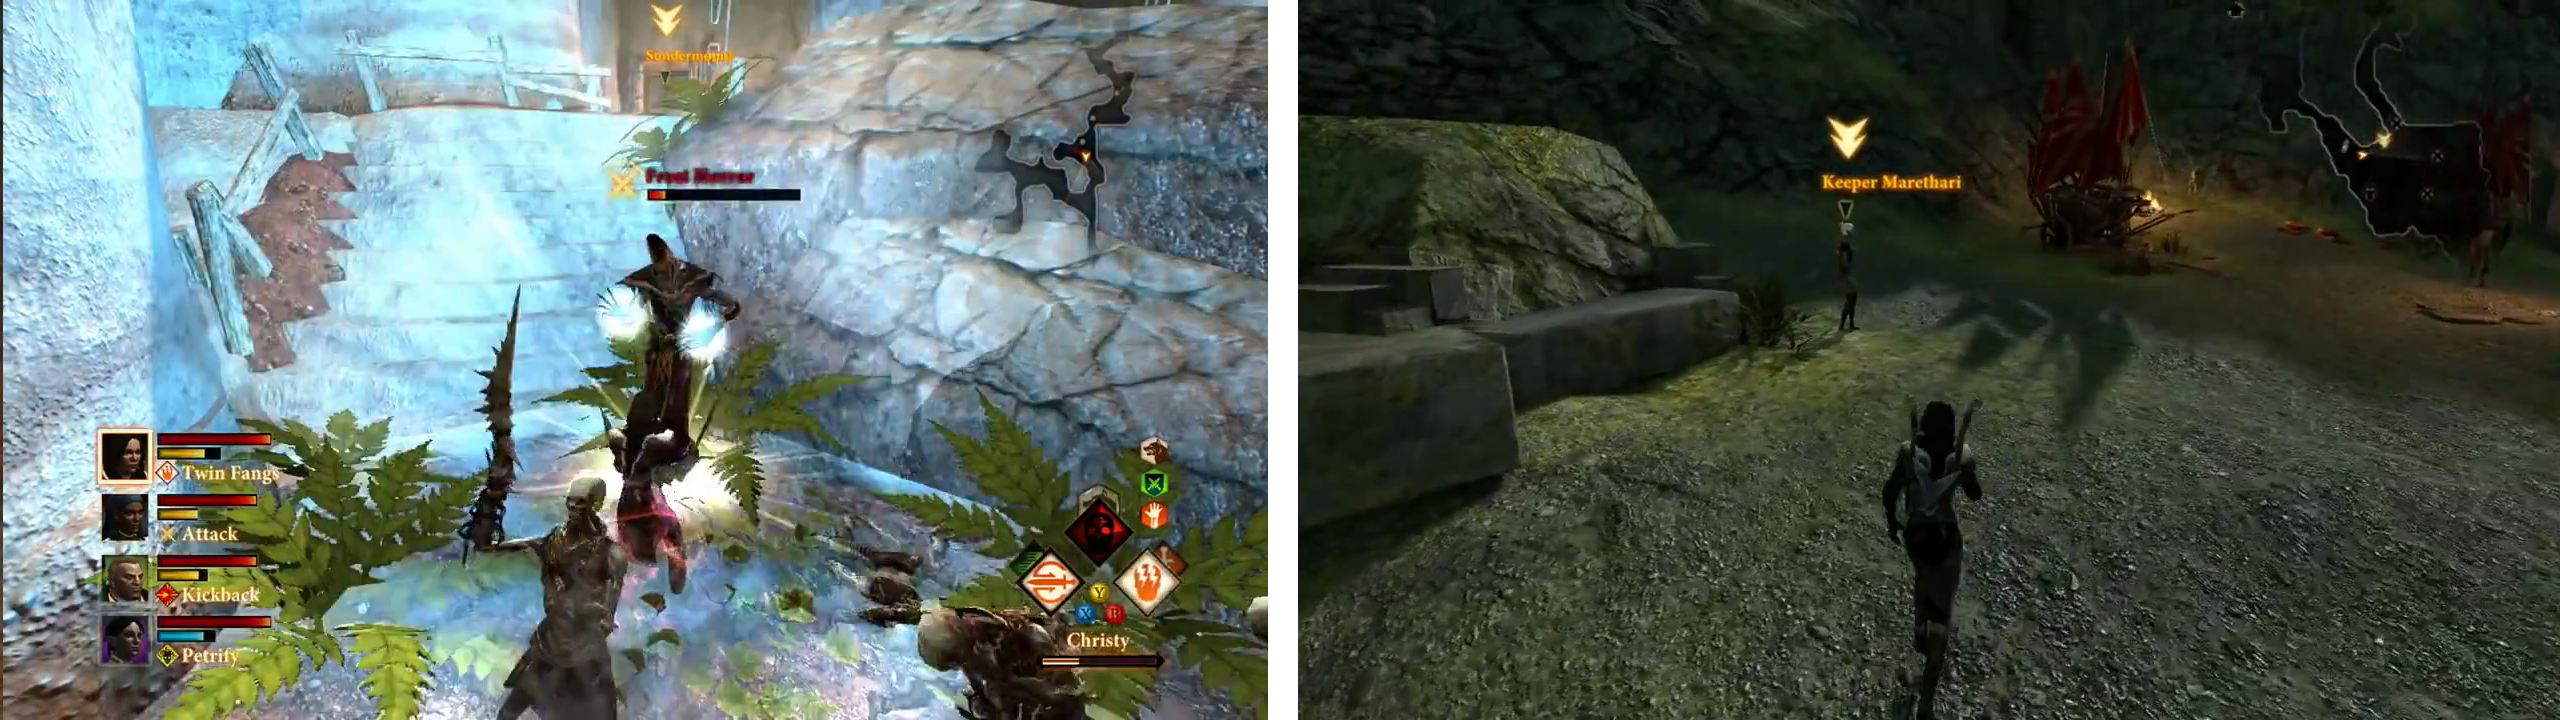 Fight your way back to the entrance (left). Return to the Keeper to hand in the quest (right).